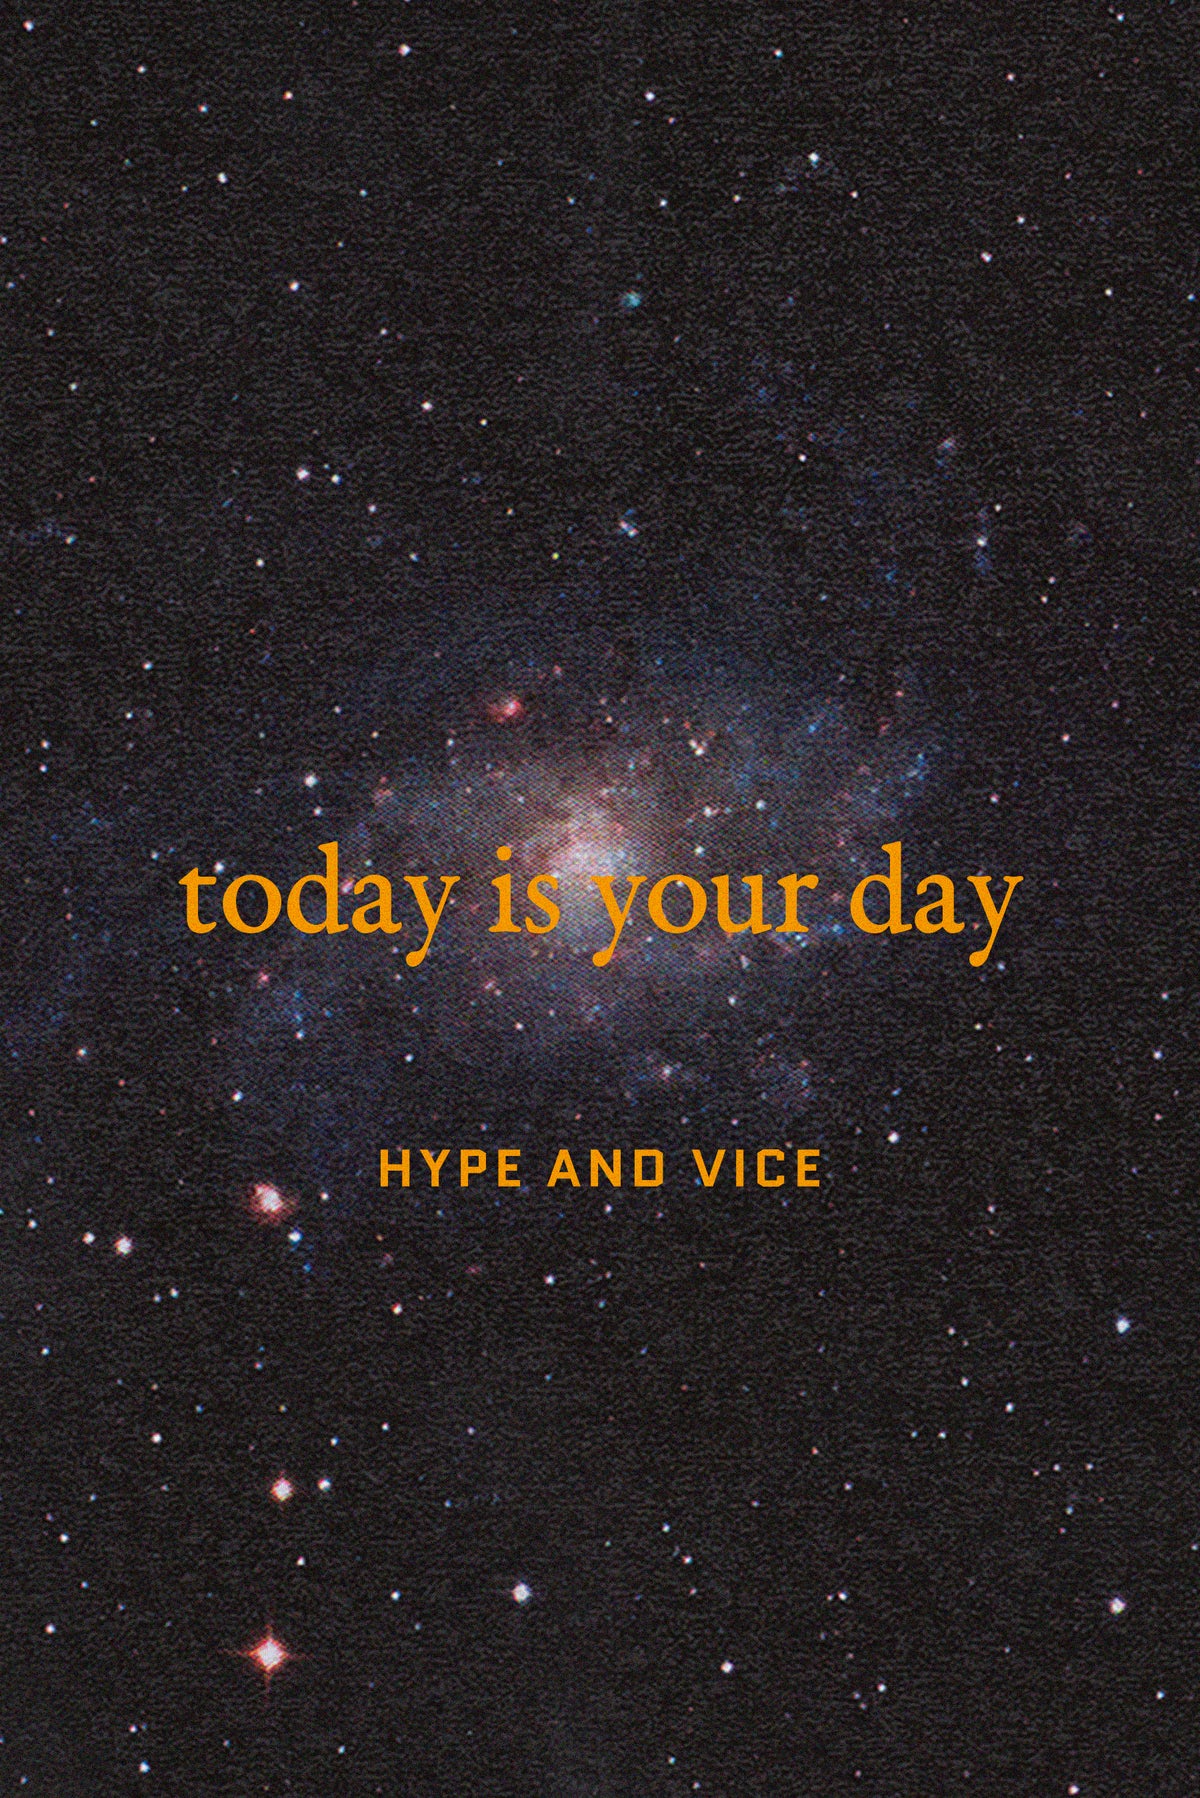 Today is your day